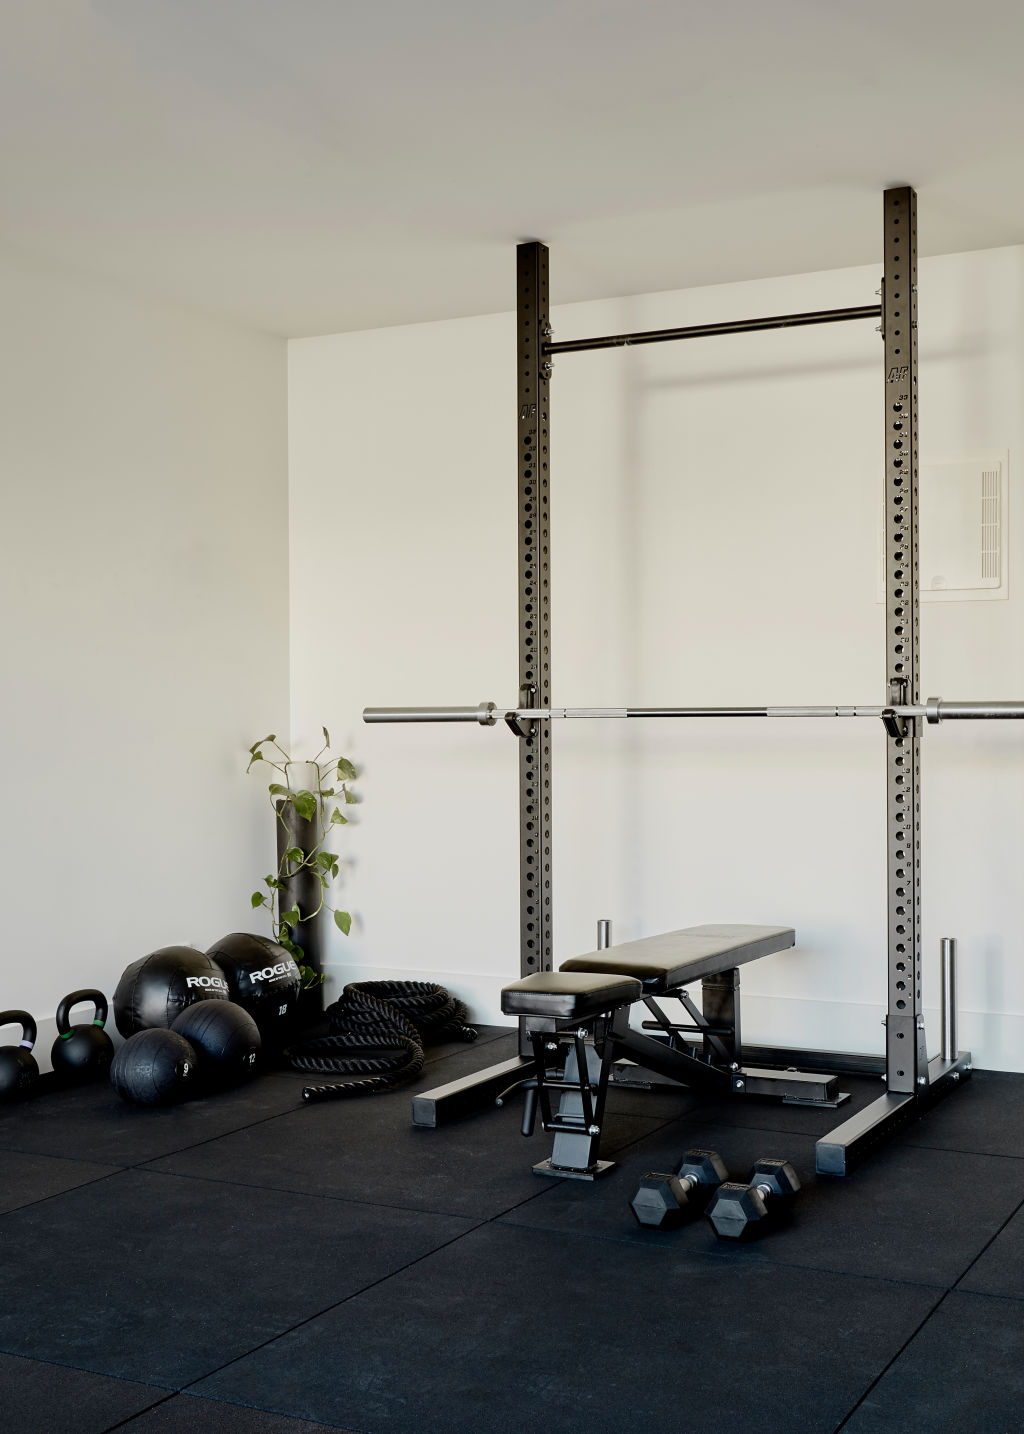 'We always wanted a home gym and managed to fully fit it out during lockdown version 1.0.' Photo: Amelia Stanwix